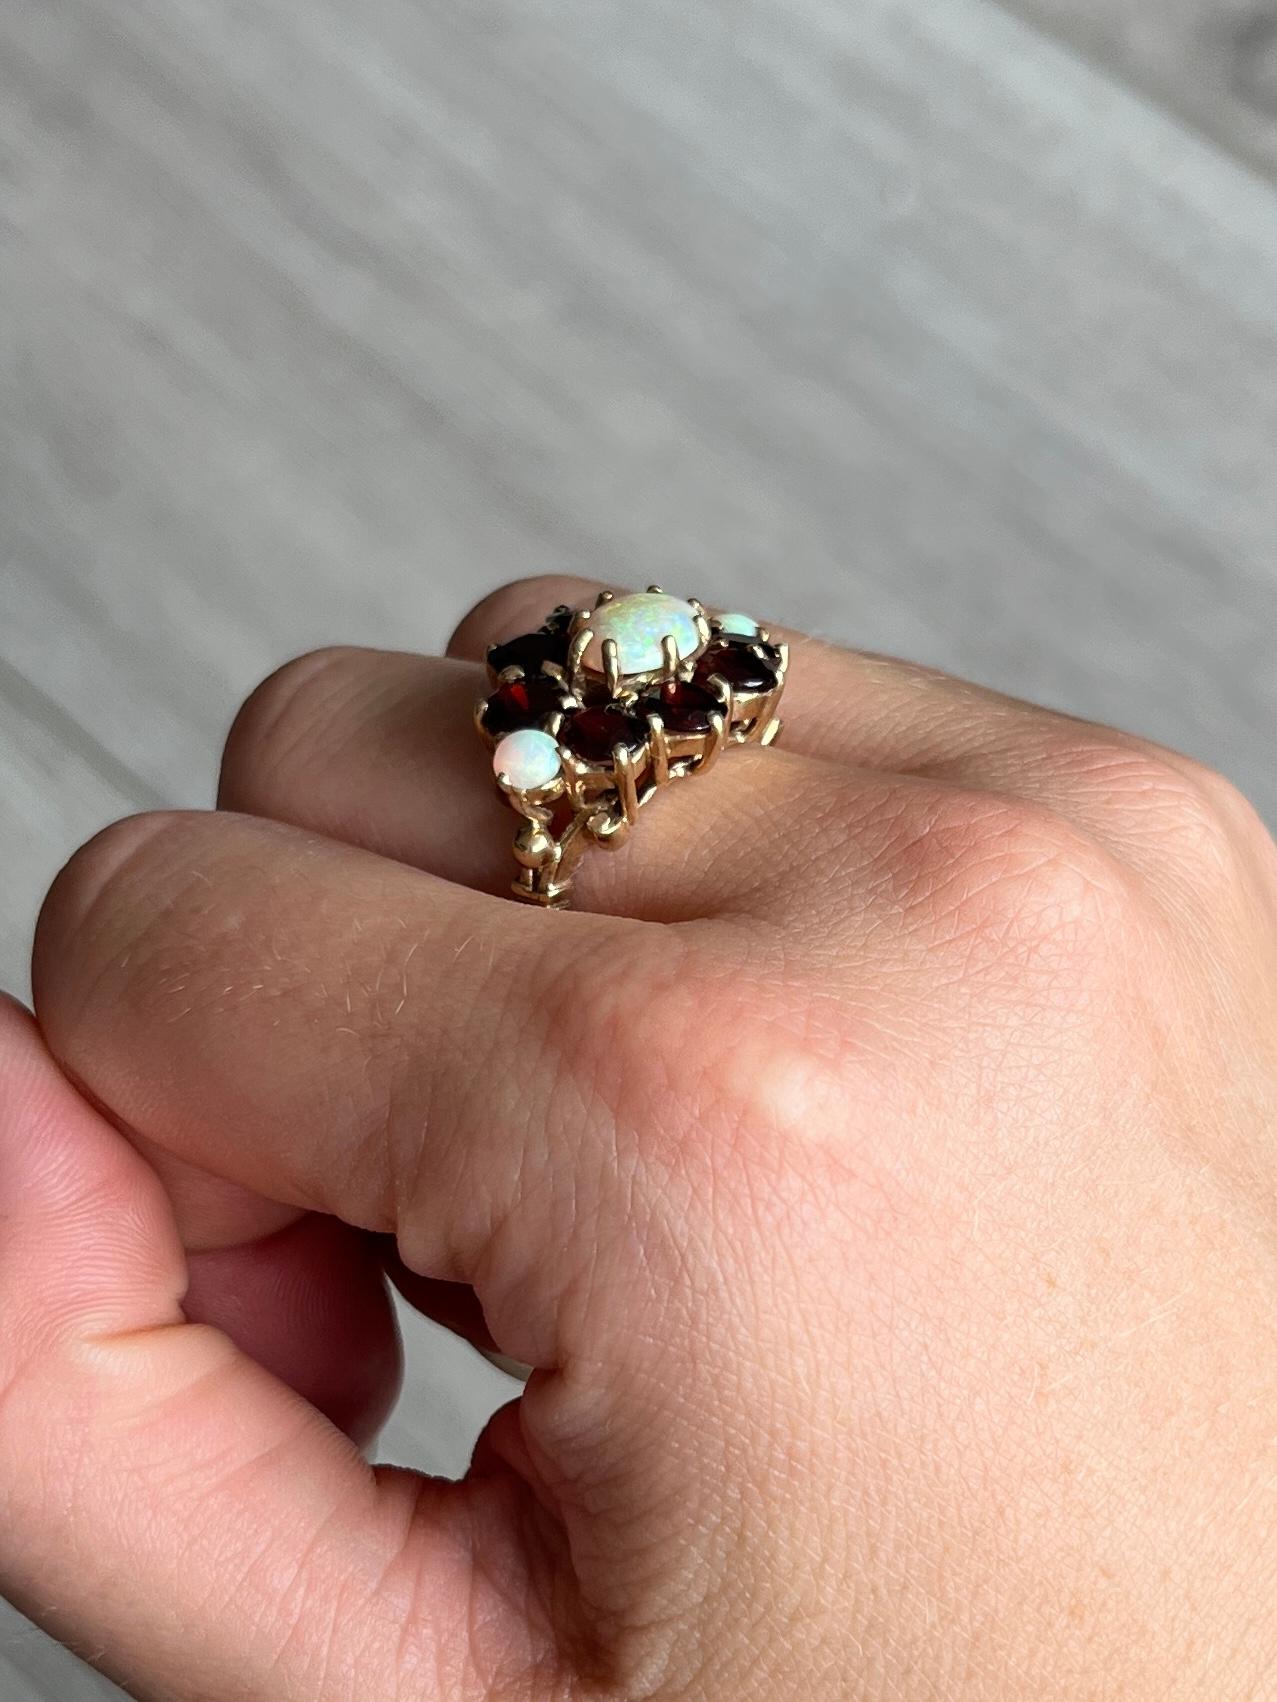 This striking ring holds round cut garnets totalling approx 4ct and 3 shimmering opals. All the stones sit in 9carat gold claws. Hallmarked London 1975.

Ring Size: N or 6 3/4 
Cluster Dimensions: 16x25mm
Height Off Finger: 7mm

Weight: 6.7g